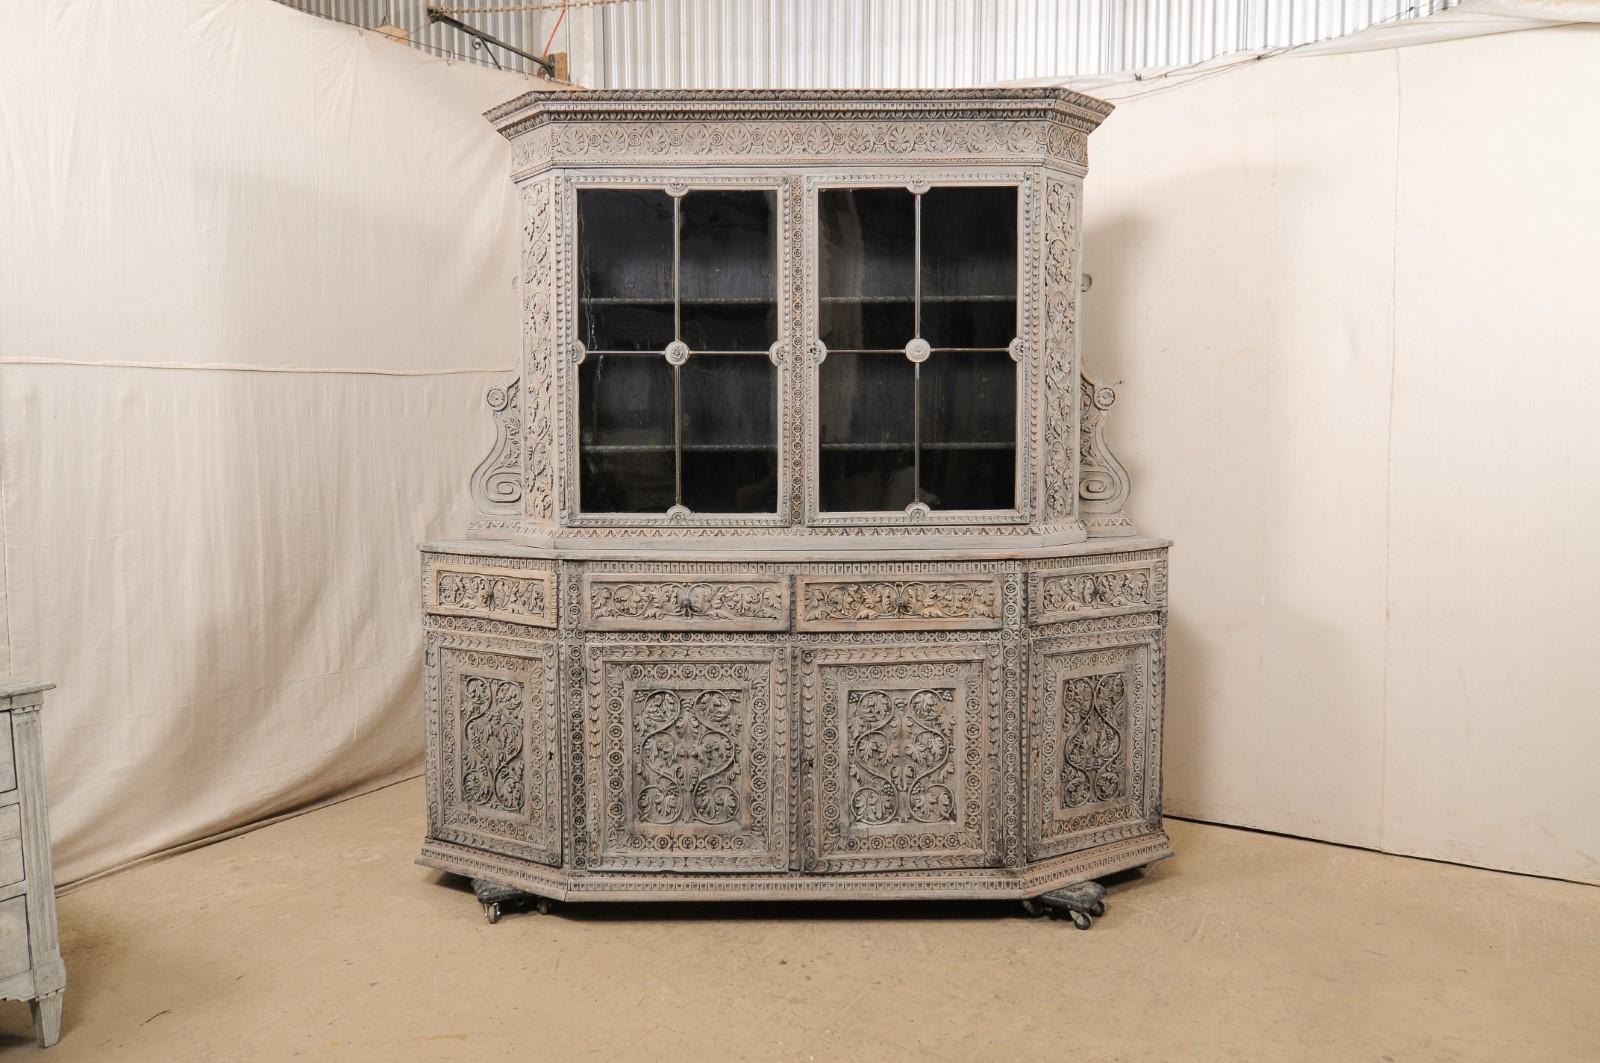 A positively gorgeous, large-sized, Italian hand-carved wood cabinet, with upper glass display, from the 18th century. This antique cabinet from Italy features an elaborately carved foliage and floral motif design-with particular emphasis beneath